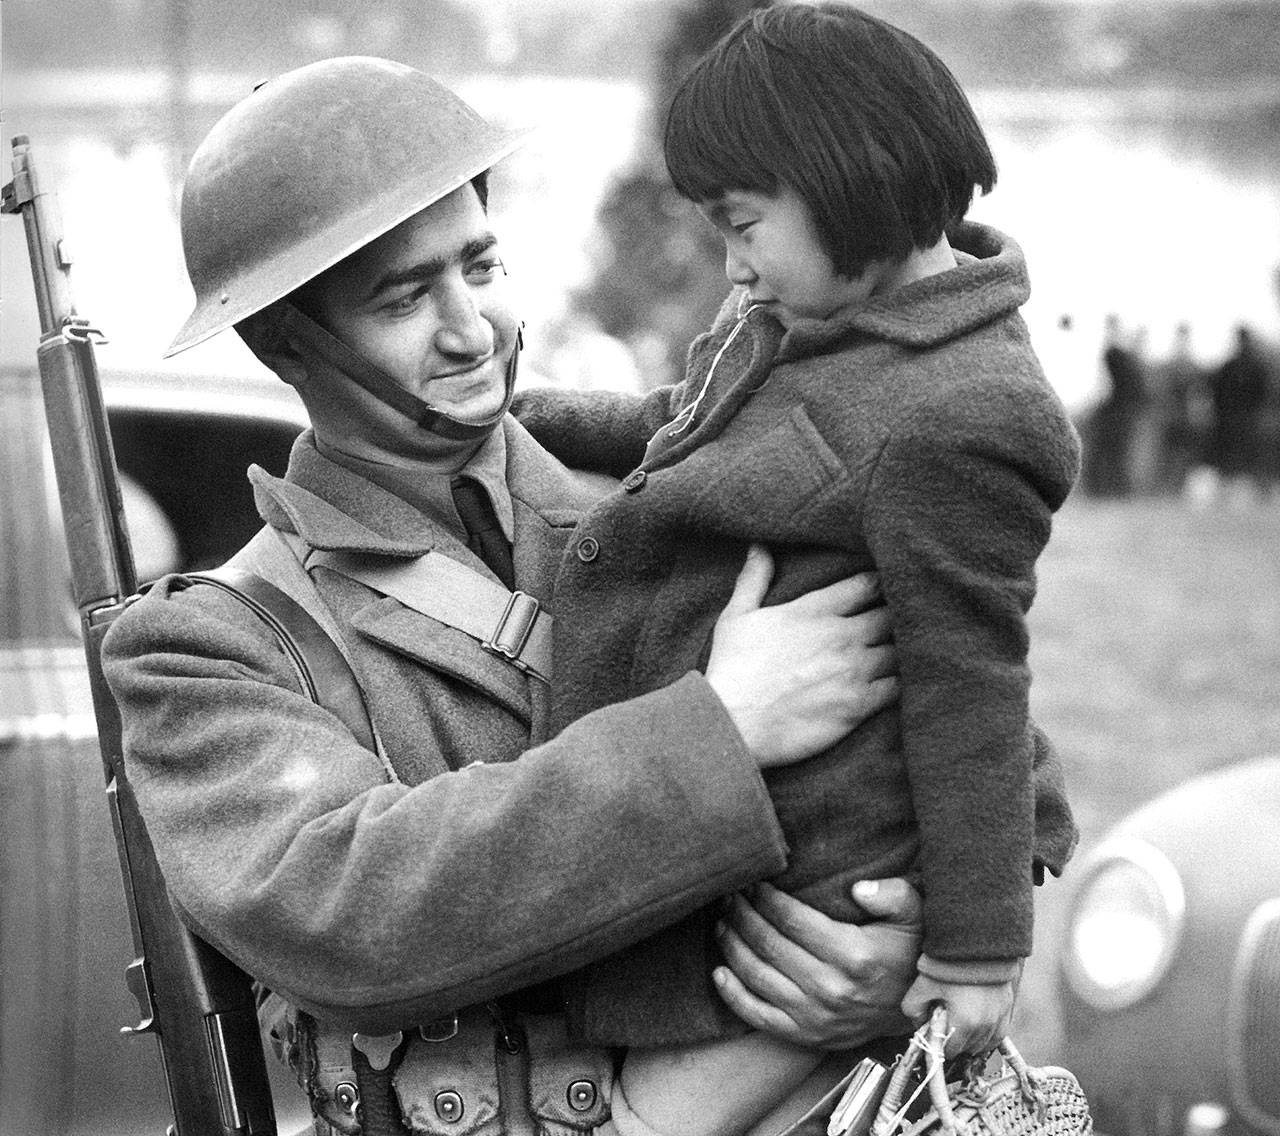 An Army soldier holds Setsuko Kino, 8, while they wait for the ferry Kehloken to arrive to take Japanese American families off Bainbridge Island on March 30, 1942. (Photo courtesy of the Bainbridge Island Historical Museum)